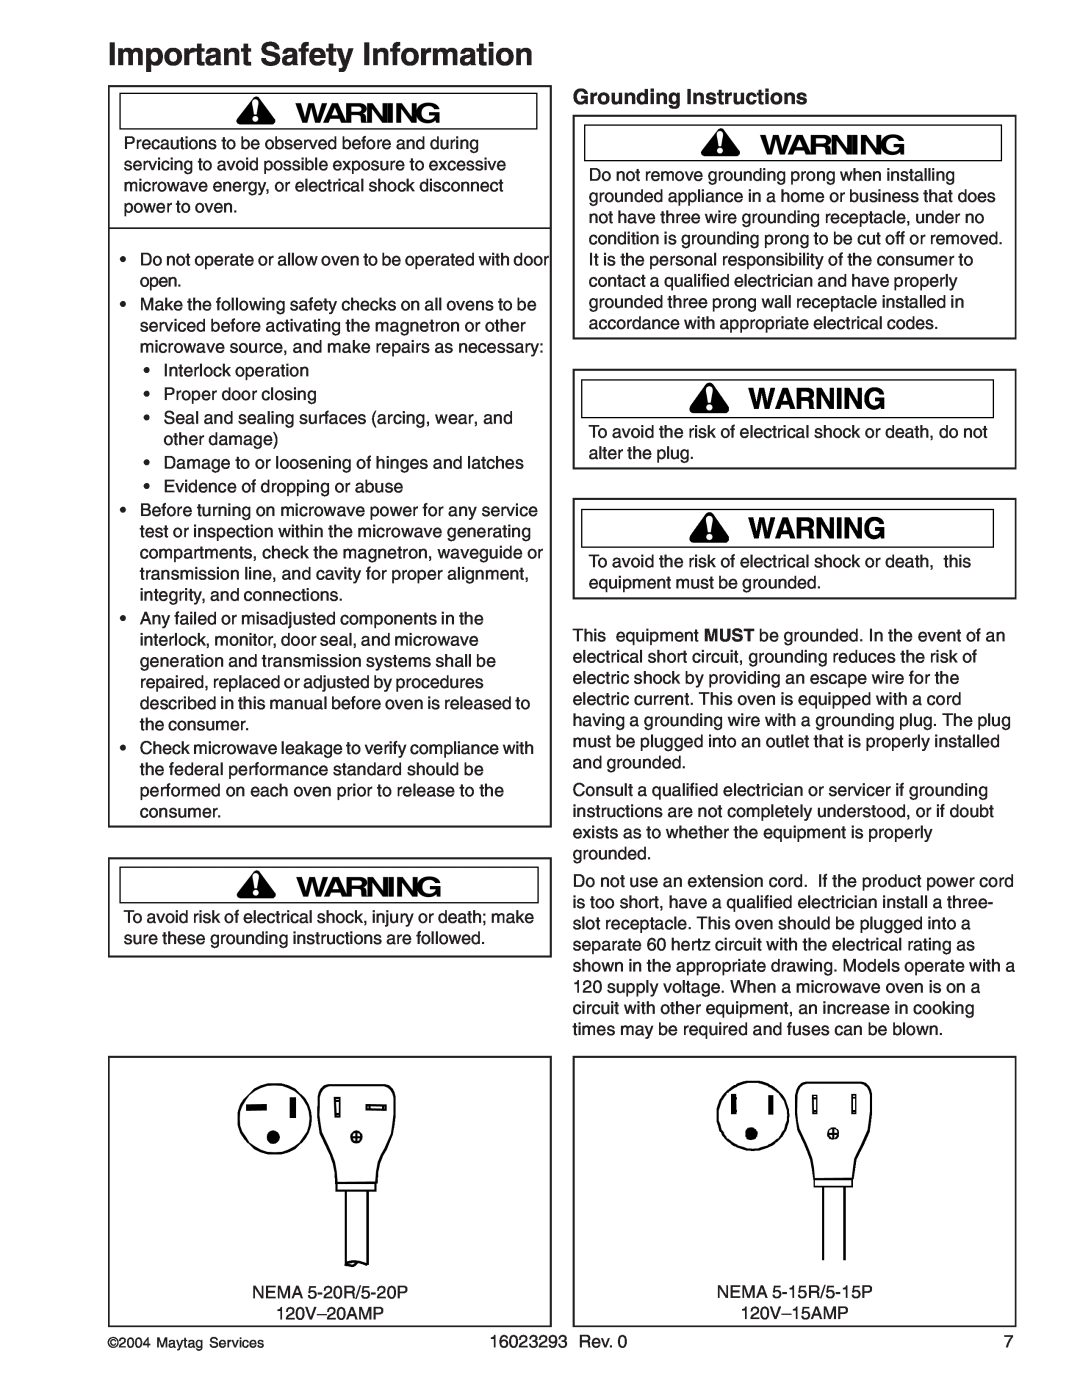 Maytag RCS10DA, RFS manual Grounding Instructions, Important Safety Information 